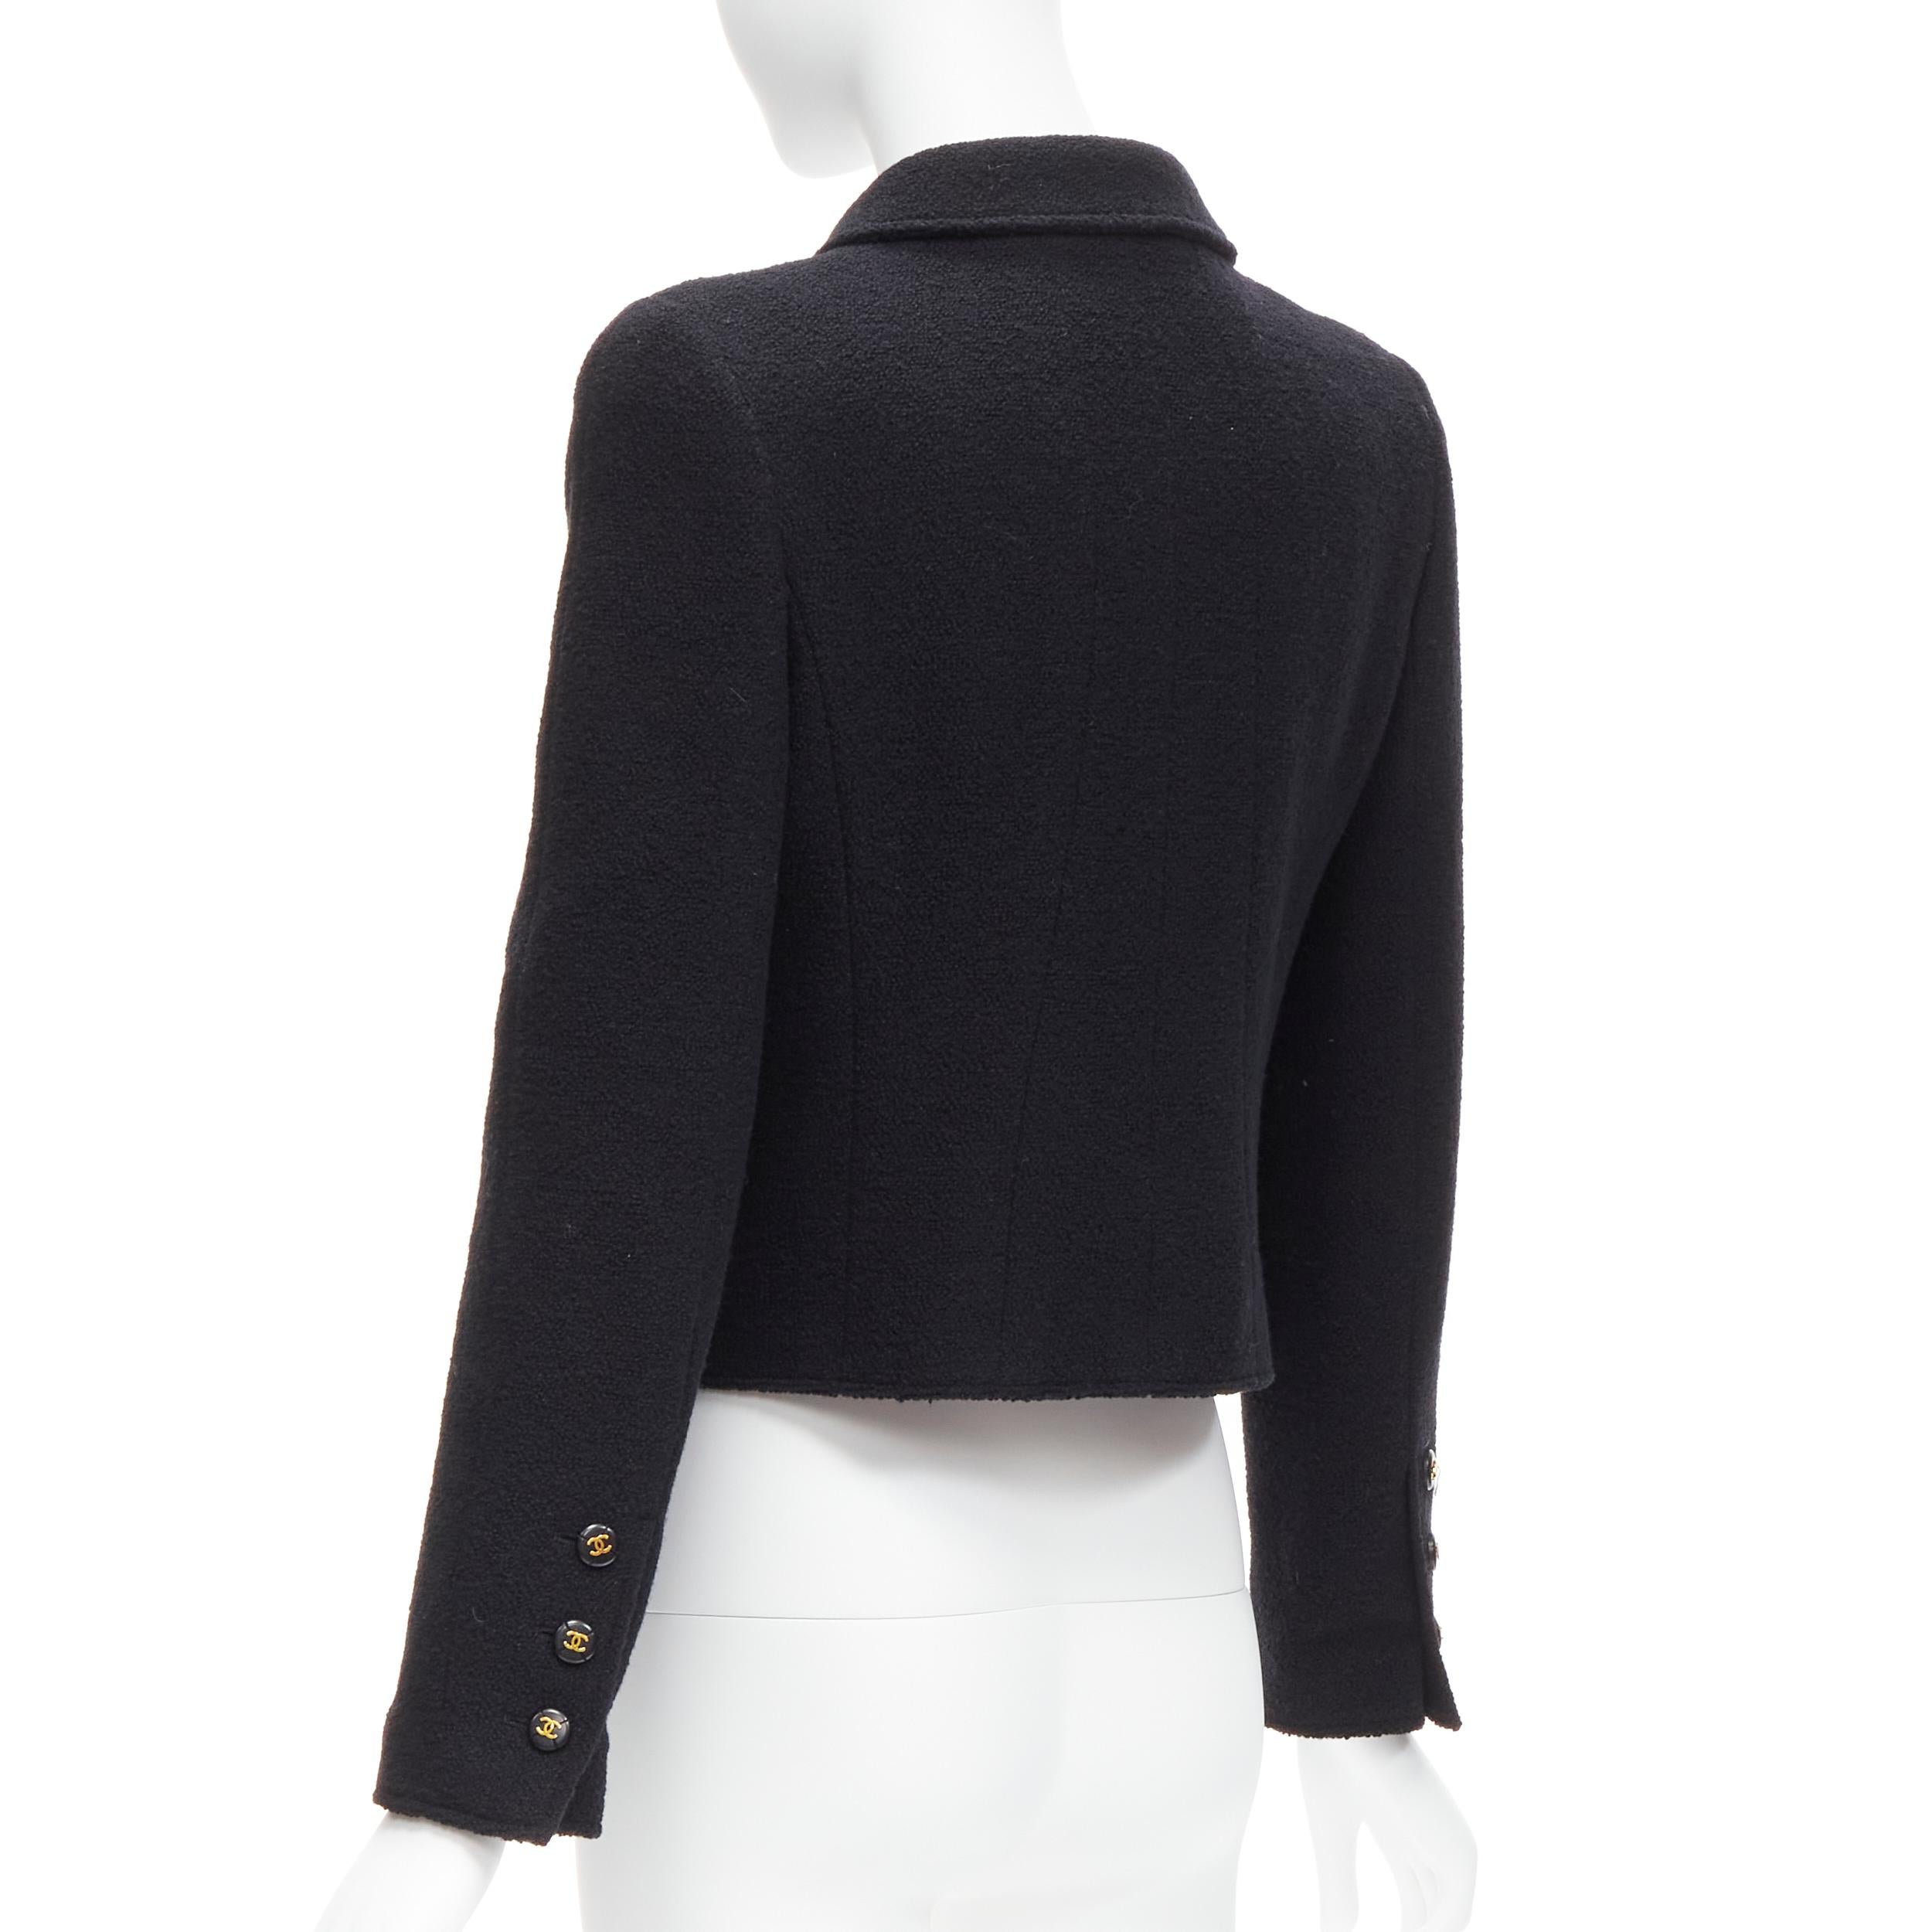 CHANEL 95P black wool crepe gold CC button 4 pocket cropped jacket top 3